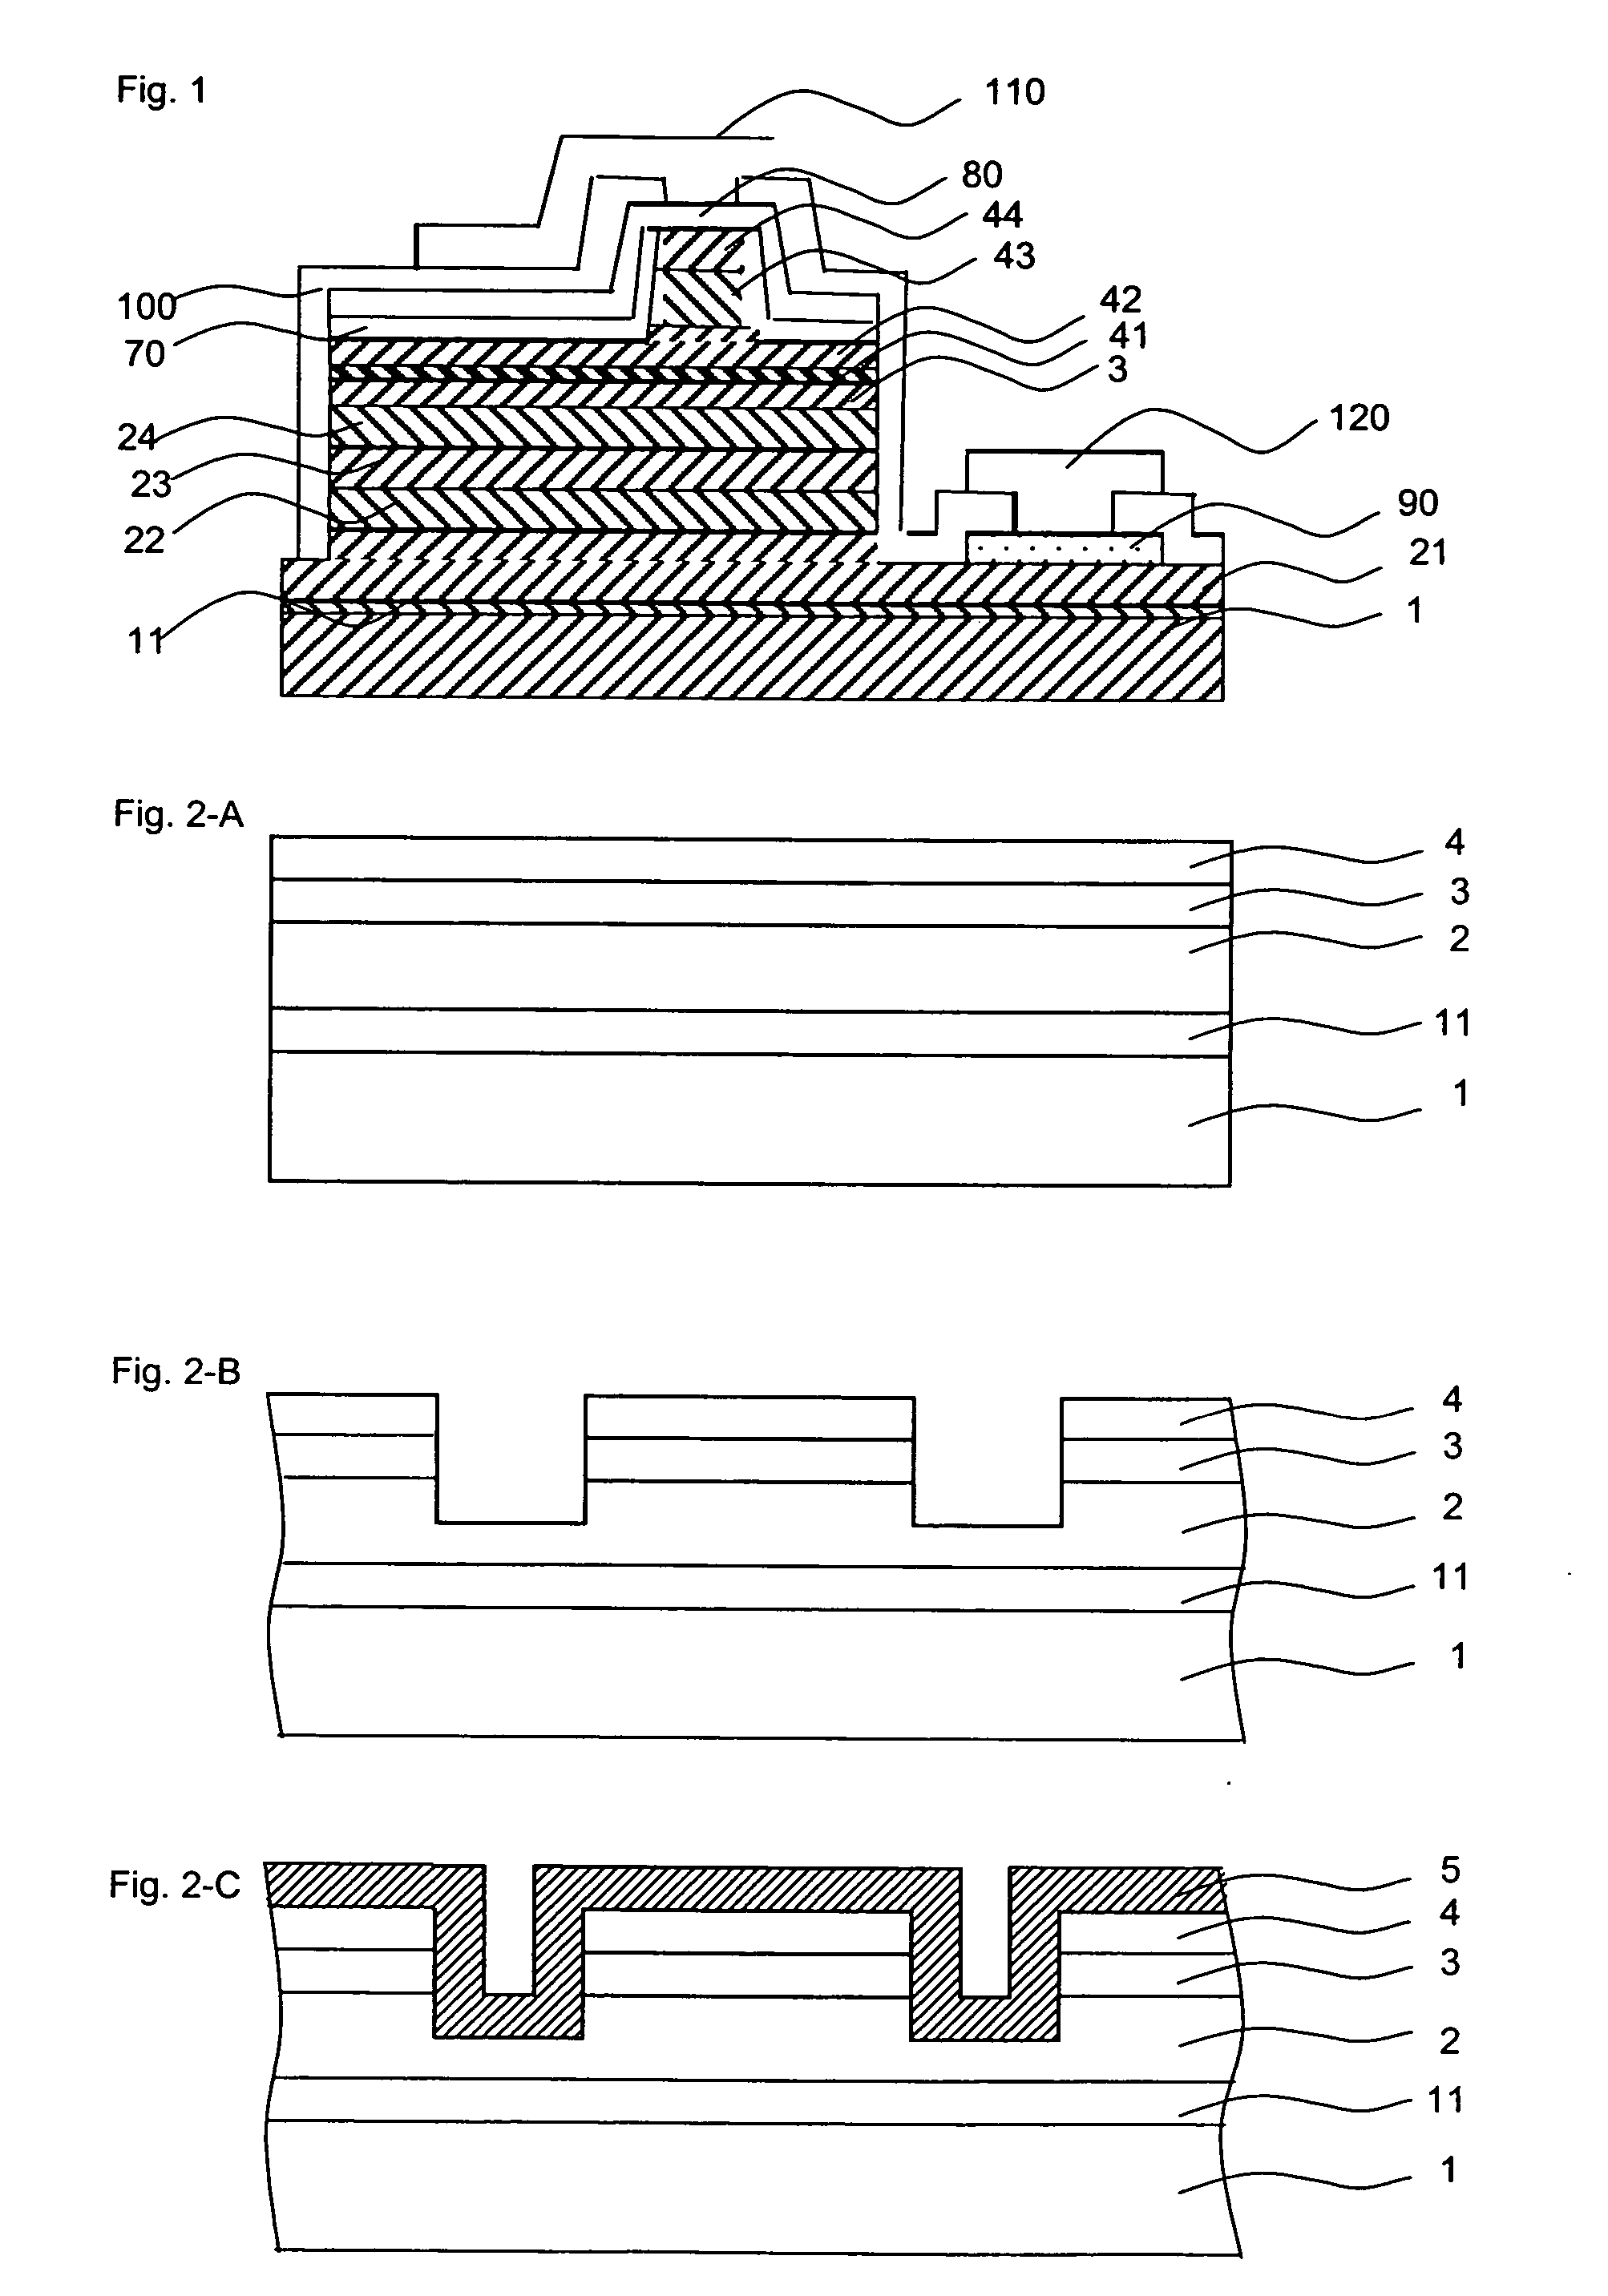 Nitride semiconductor laser device and a method for improving its performance